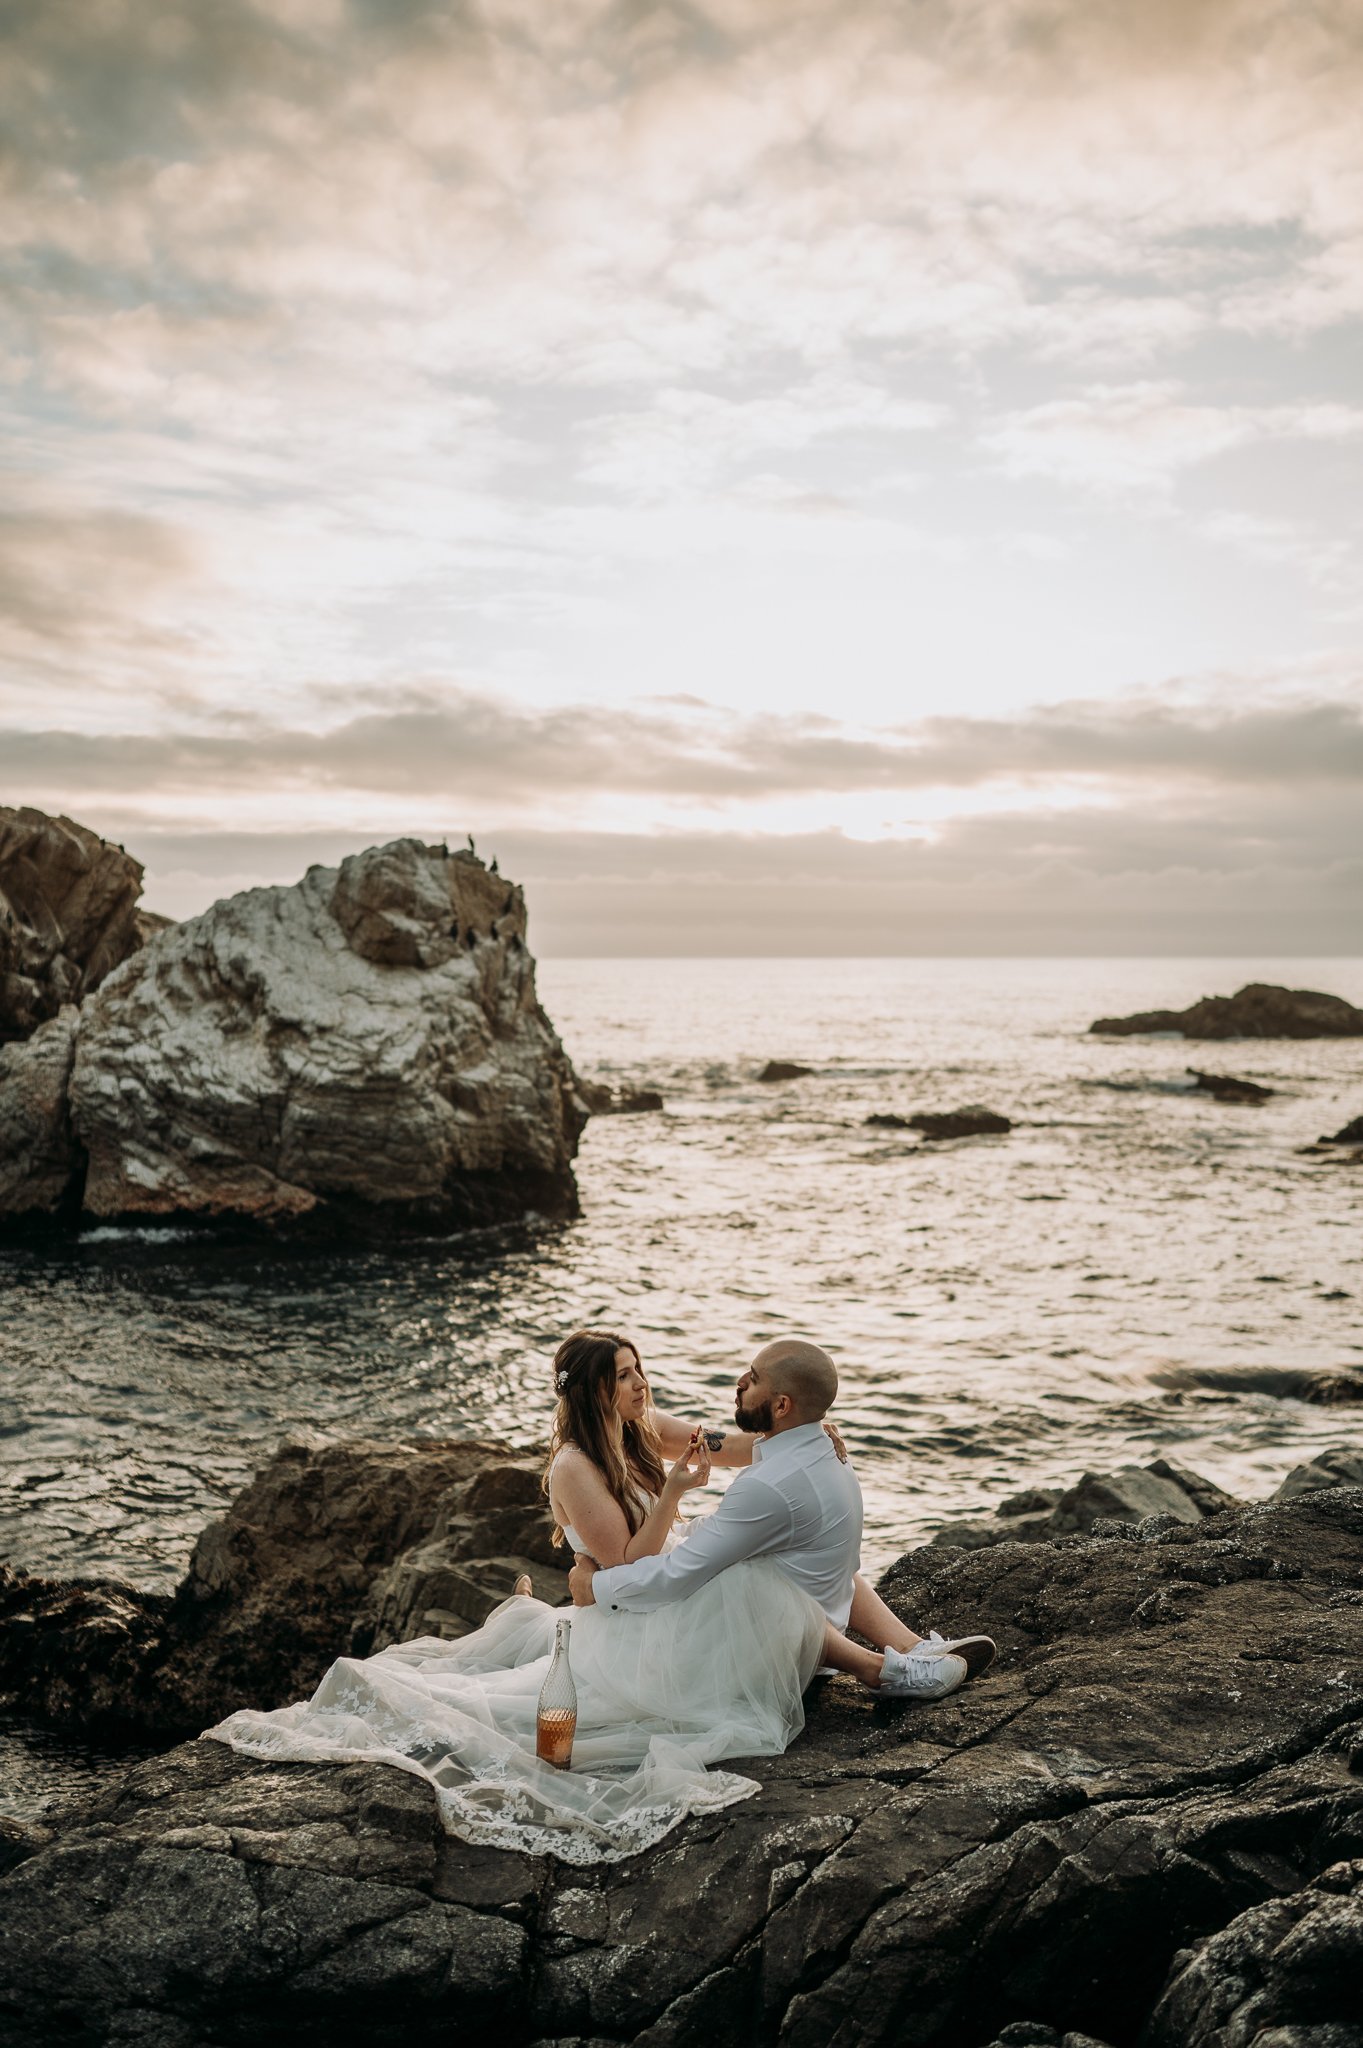 Couple sitting on cliff with Pacific Ocean in background arms intwind eating pie and drinking champagne